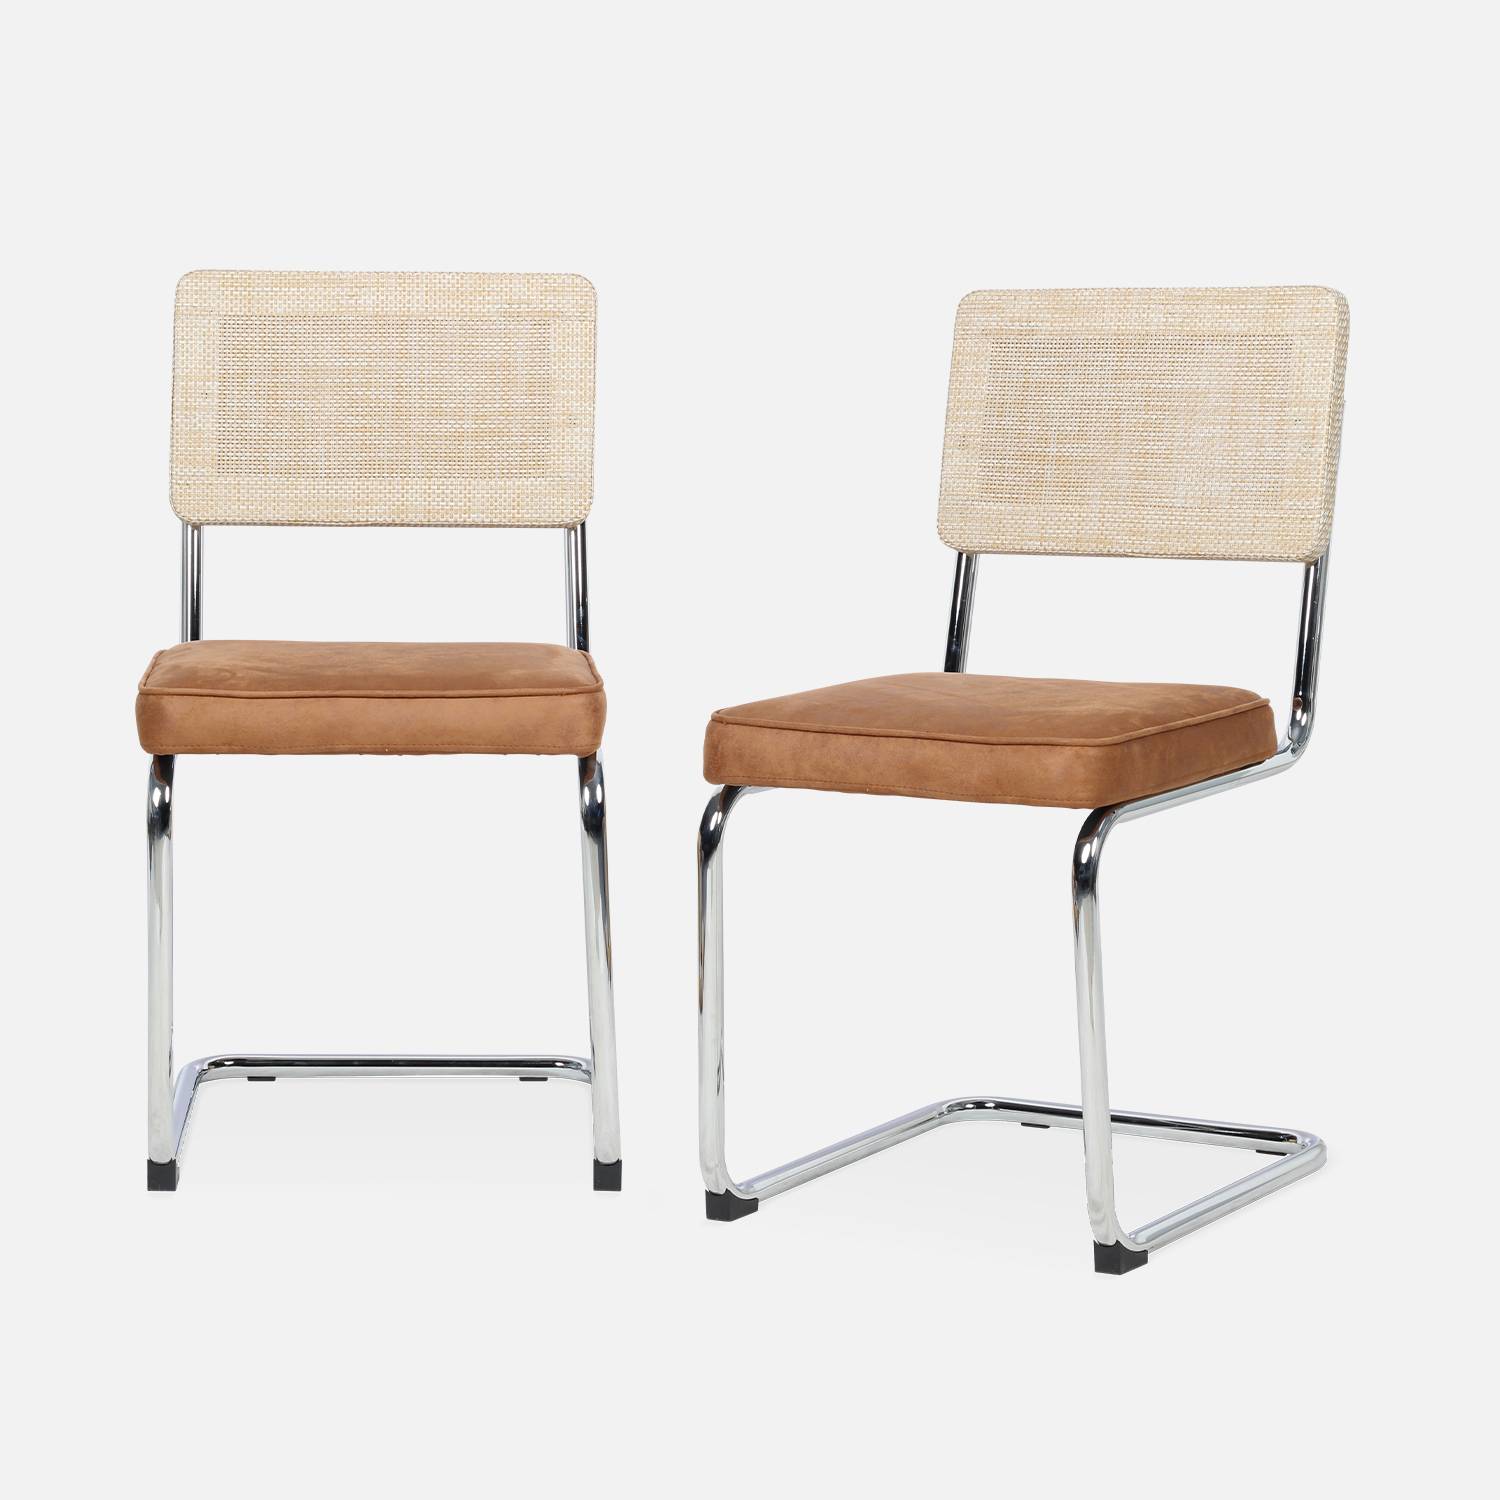 Pair of cantilever cane rattan dining chairs, 46x54.5x84.5cm - Maja - Brown,sweeek,Photo4